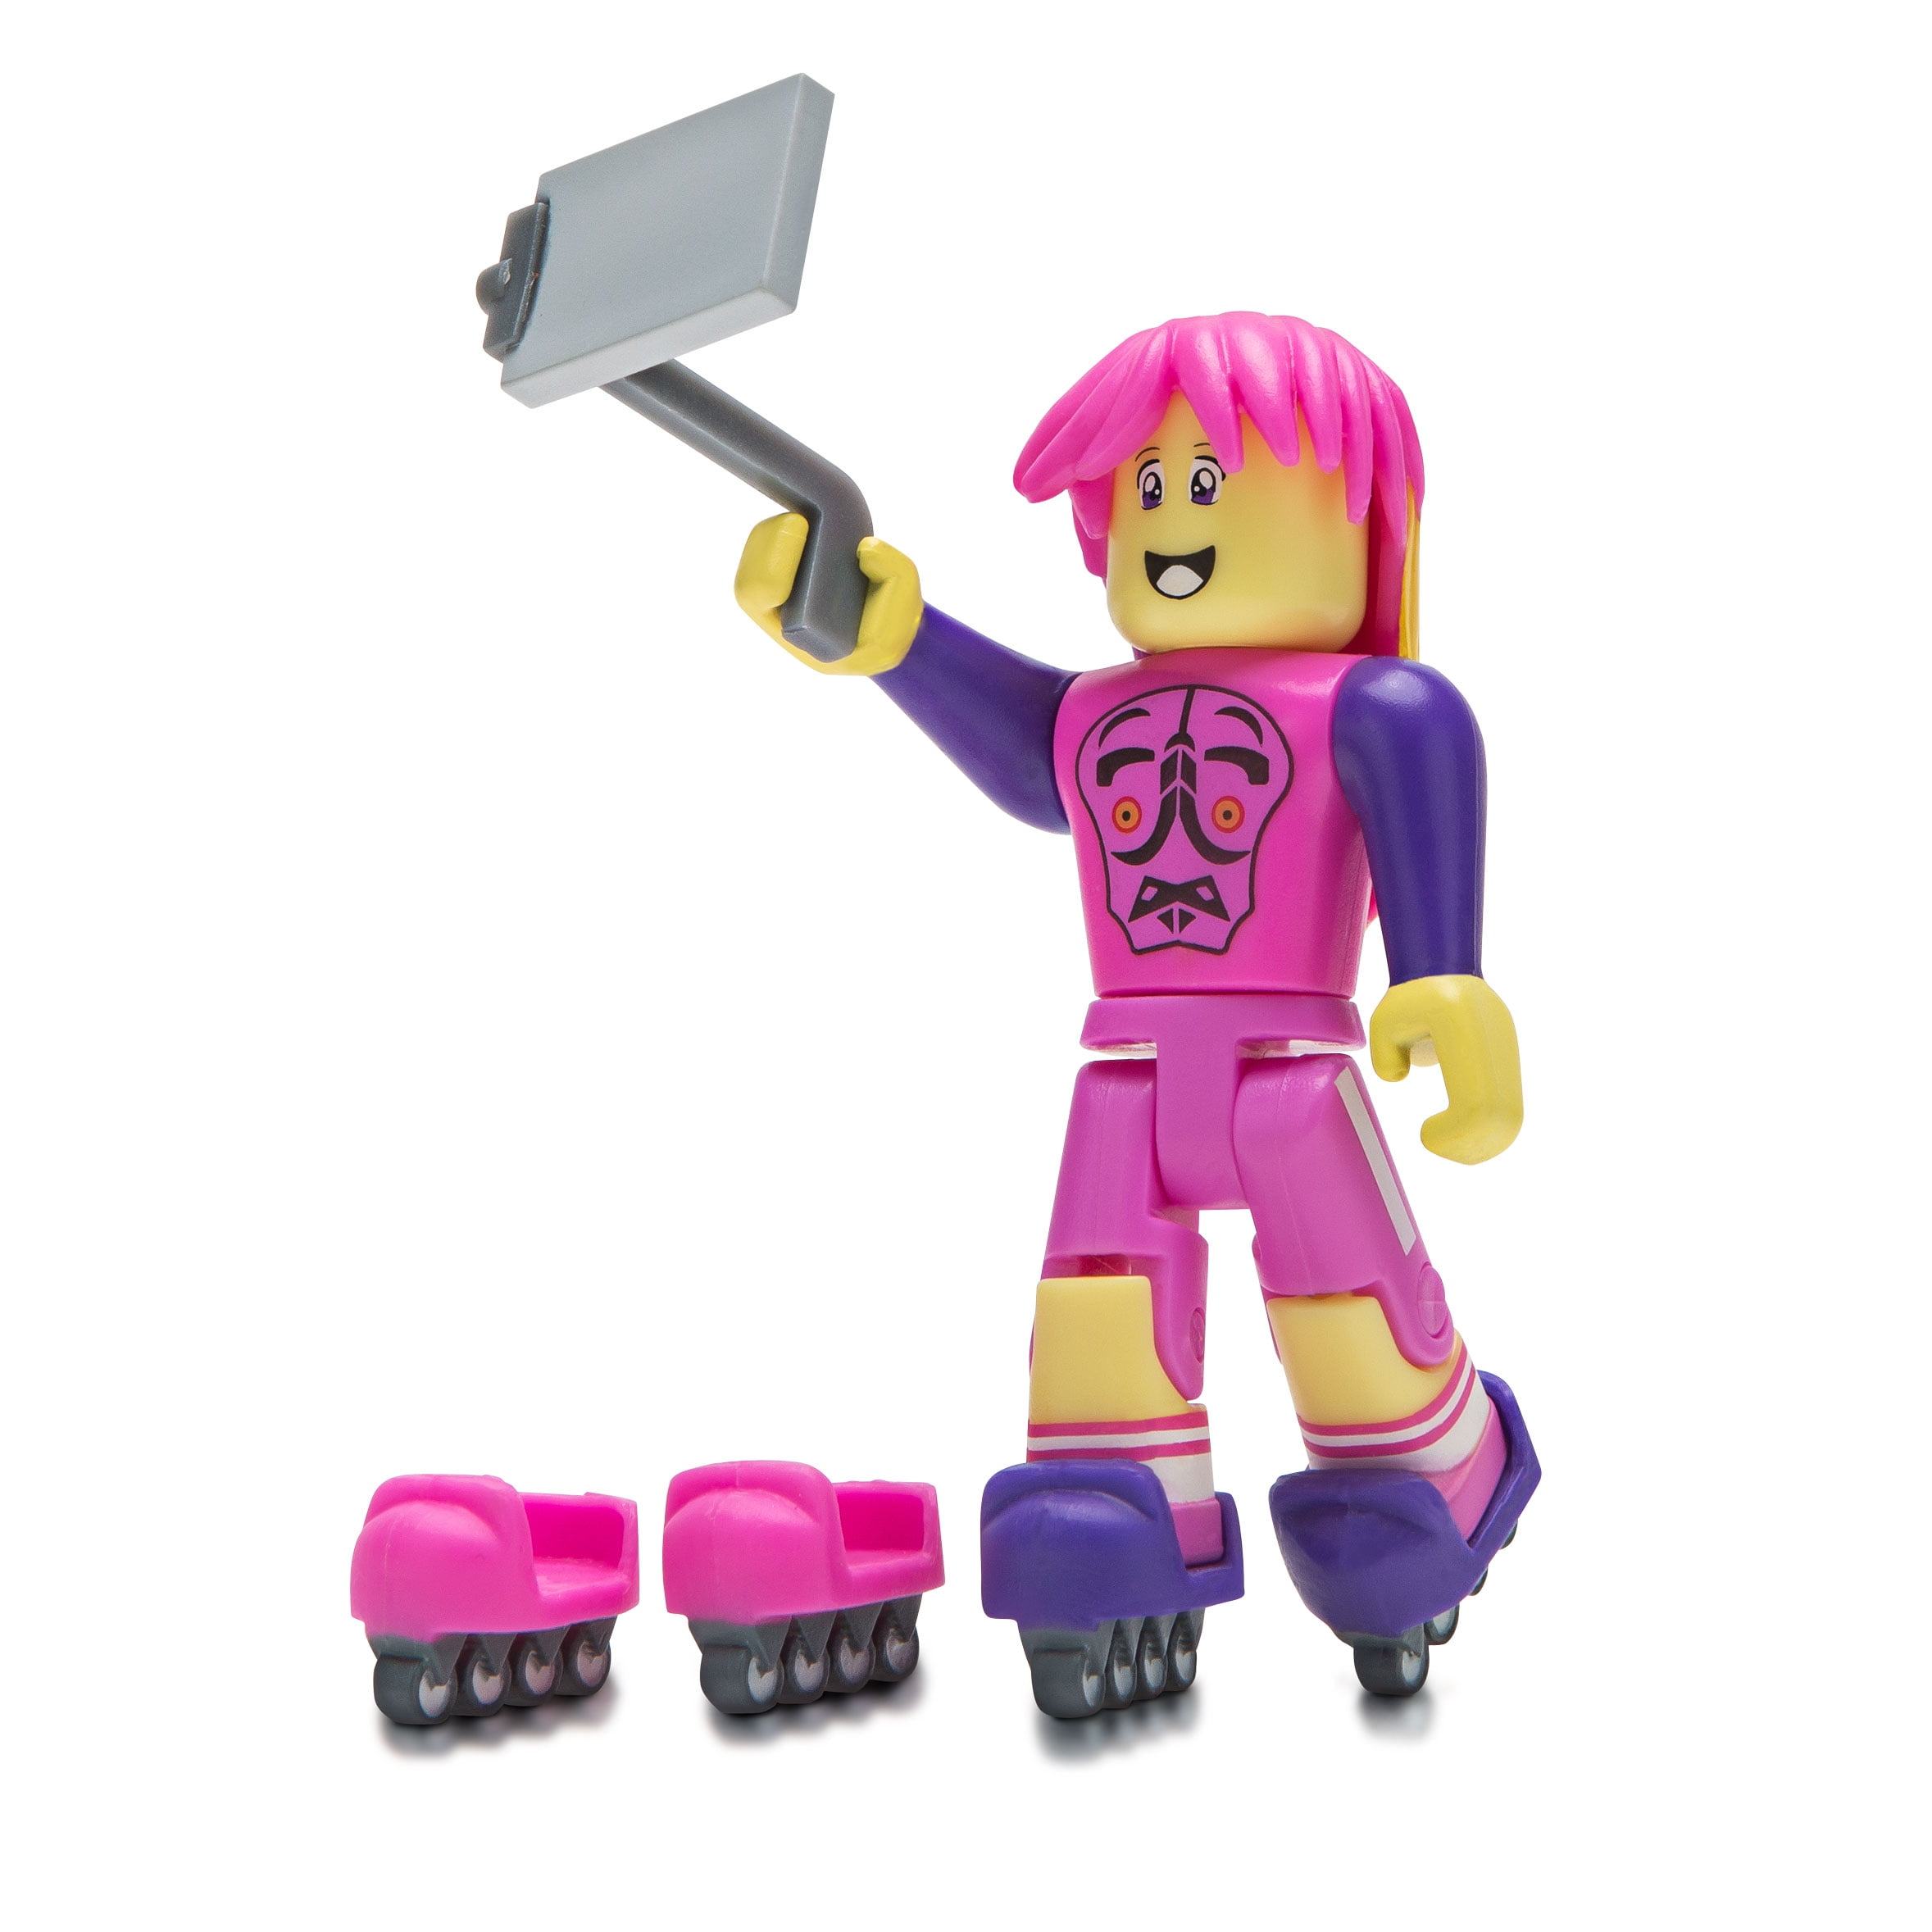 Roblox Celebrity Collection Roblox Skating Rink Figure Pack Includes Exclusive Virtual Item Walmart Com Walmart Com - roblox circus baby shirt code